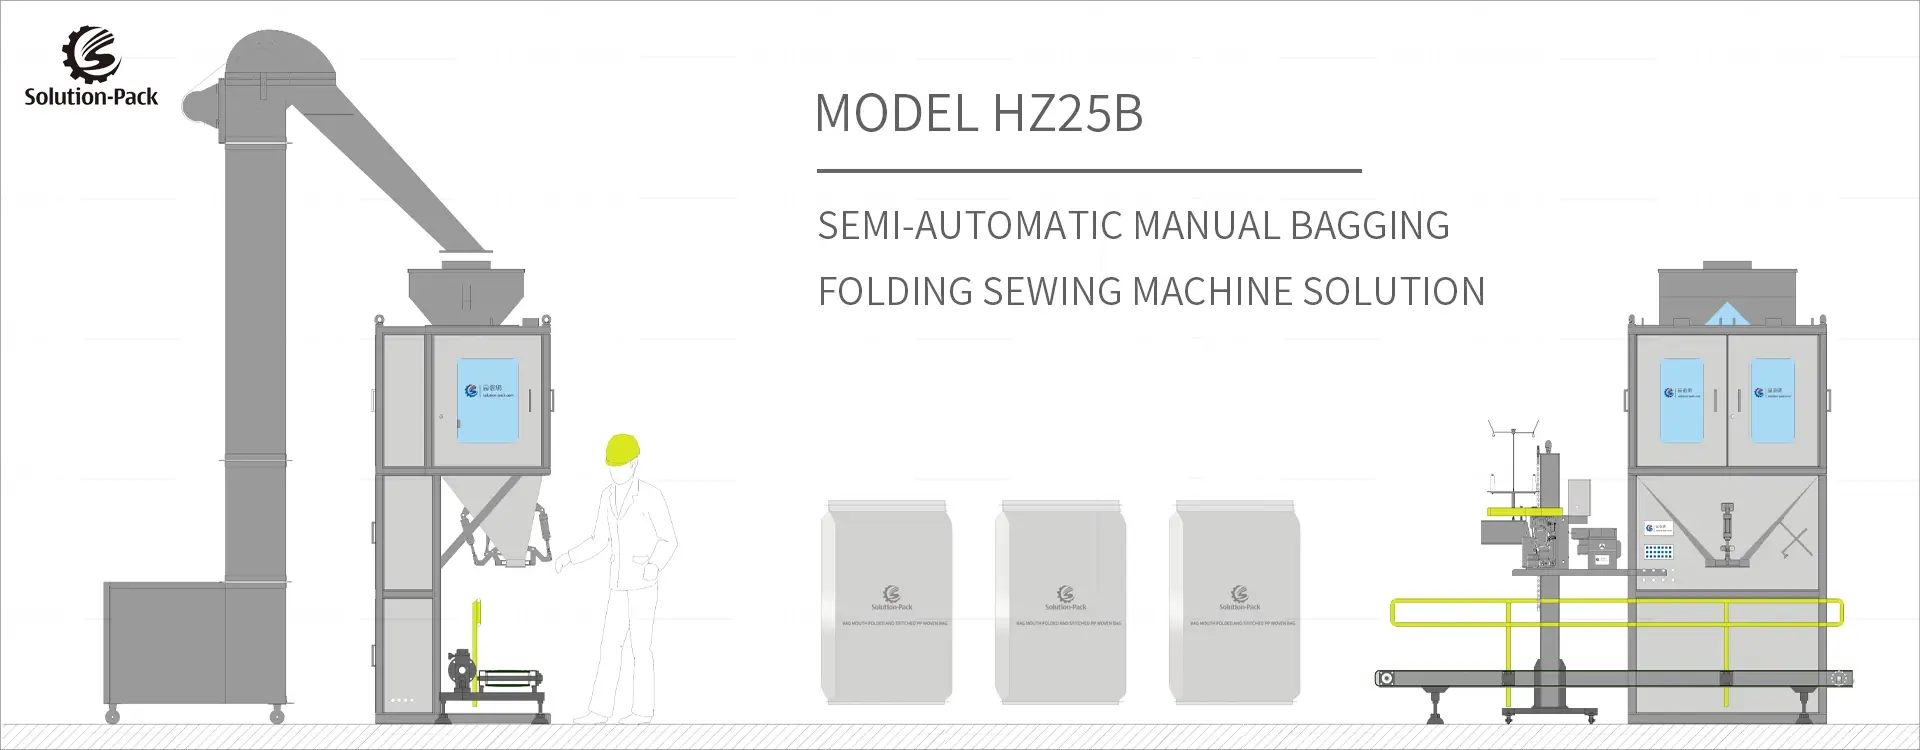 Model HZ25B Semi-Automatic Manual Bagging Machine Equipment Heading Banner Picture | Solution-Pack